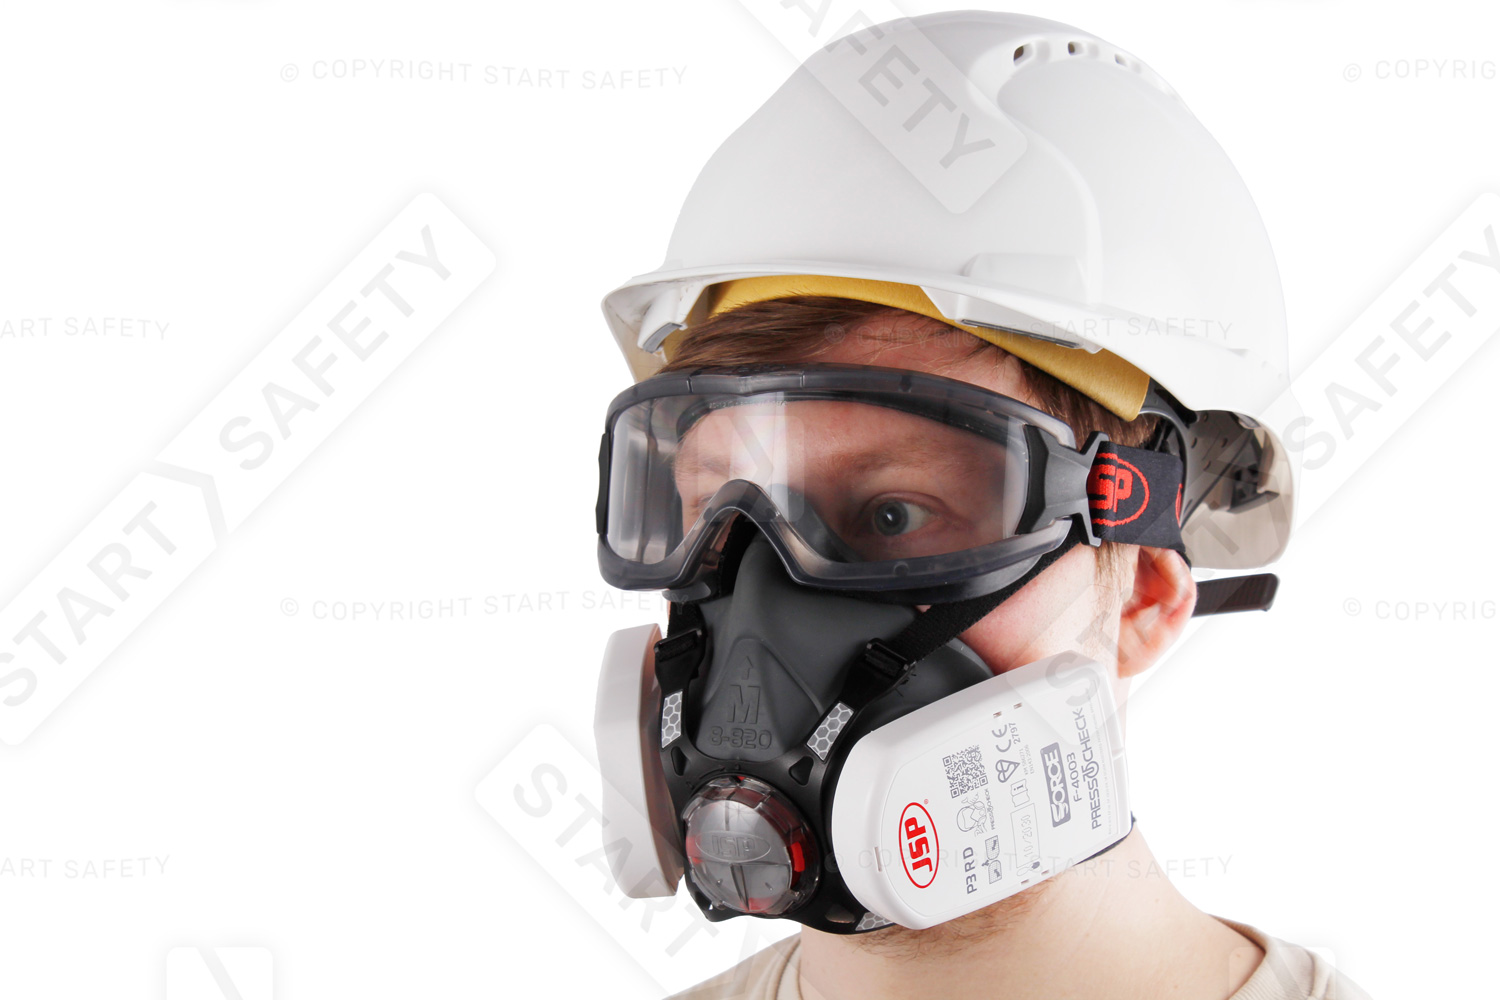 JSP Force 8 Half Mask Is Compatible With Other JSP PPE Products Such As Goggles And EVO Helmets